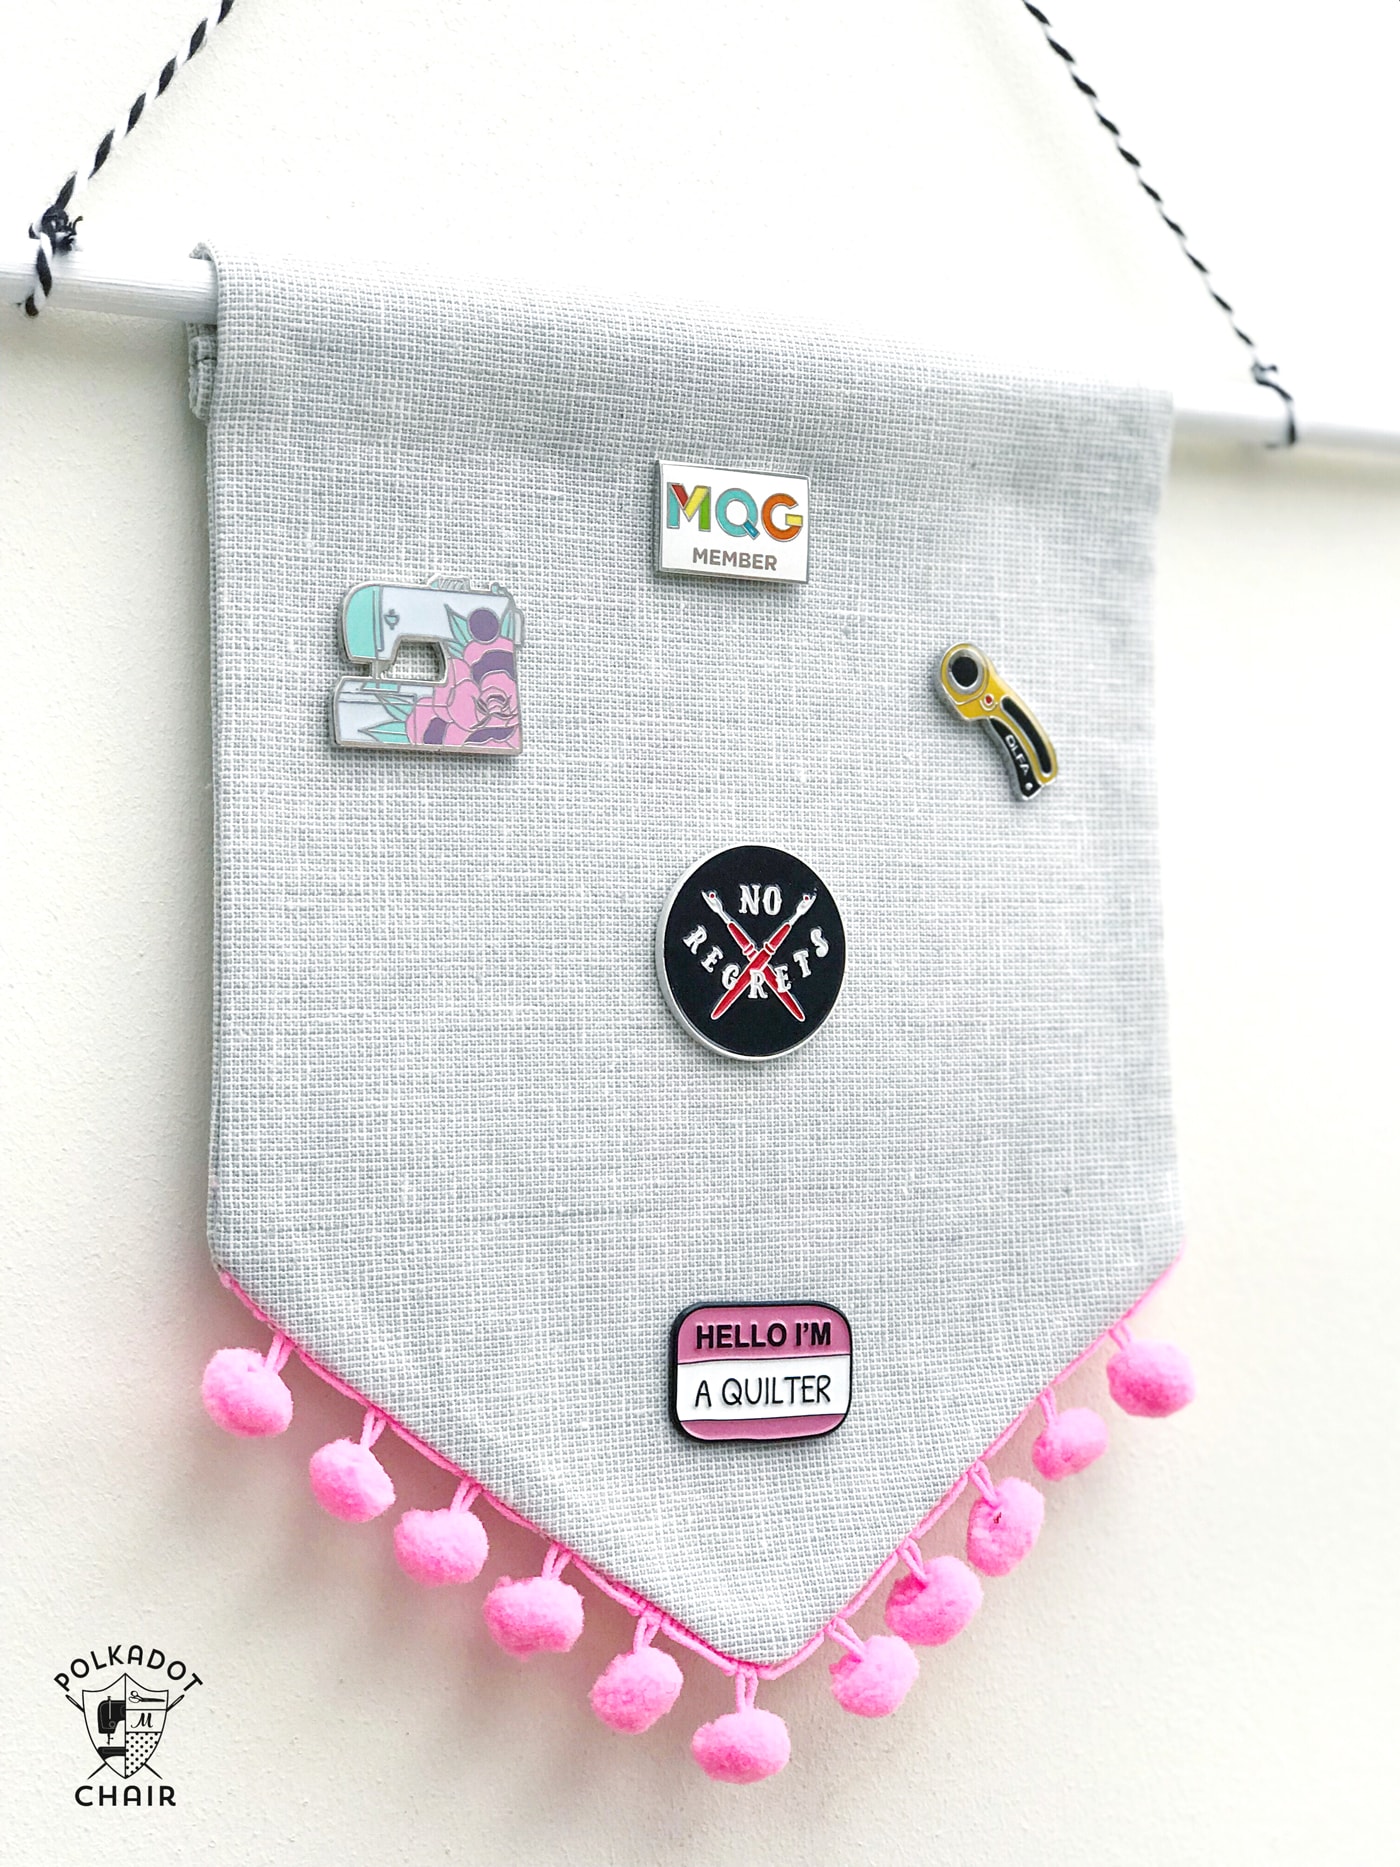 A great enamel pin display idea! Create a banner for your favorite pins with this DIY Enamel Pin Banner Tutorial. #enamelpins #sewingtutorial #pindisplayideas #bannertutorials #canvasbannertutorial